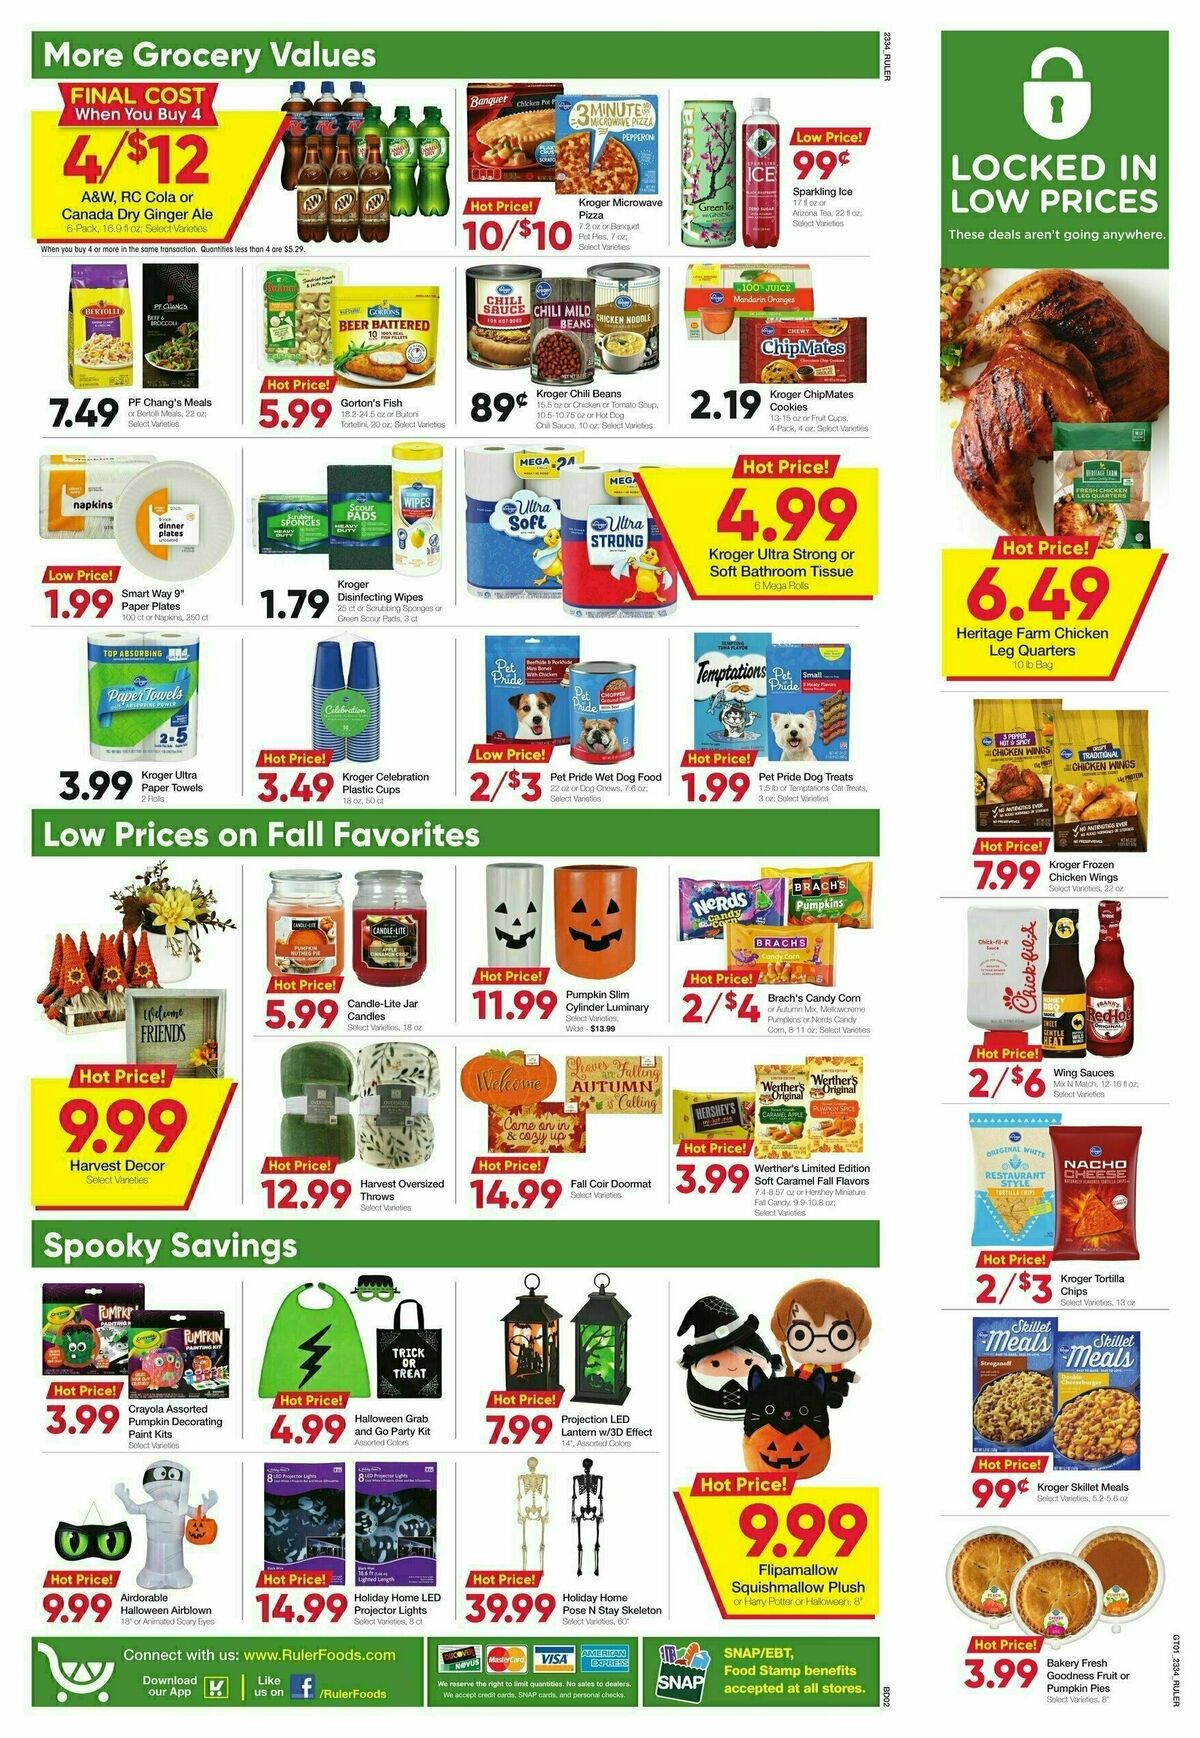 Ruler Foods Weekly Ad from September 20